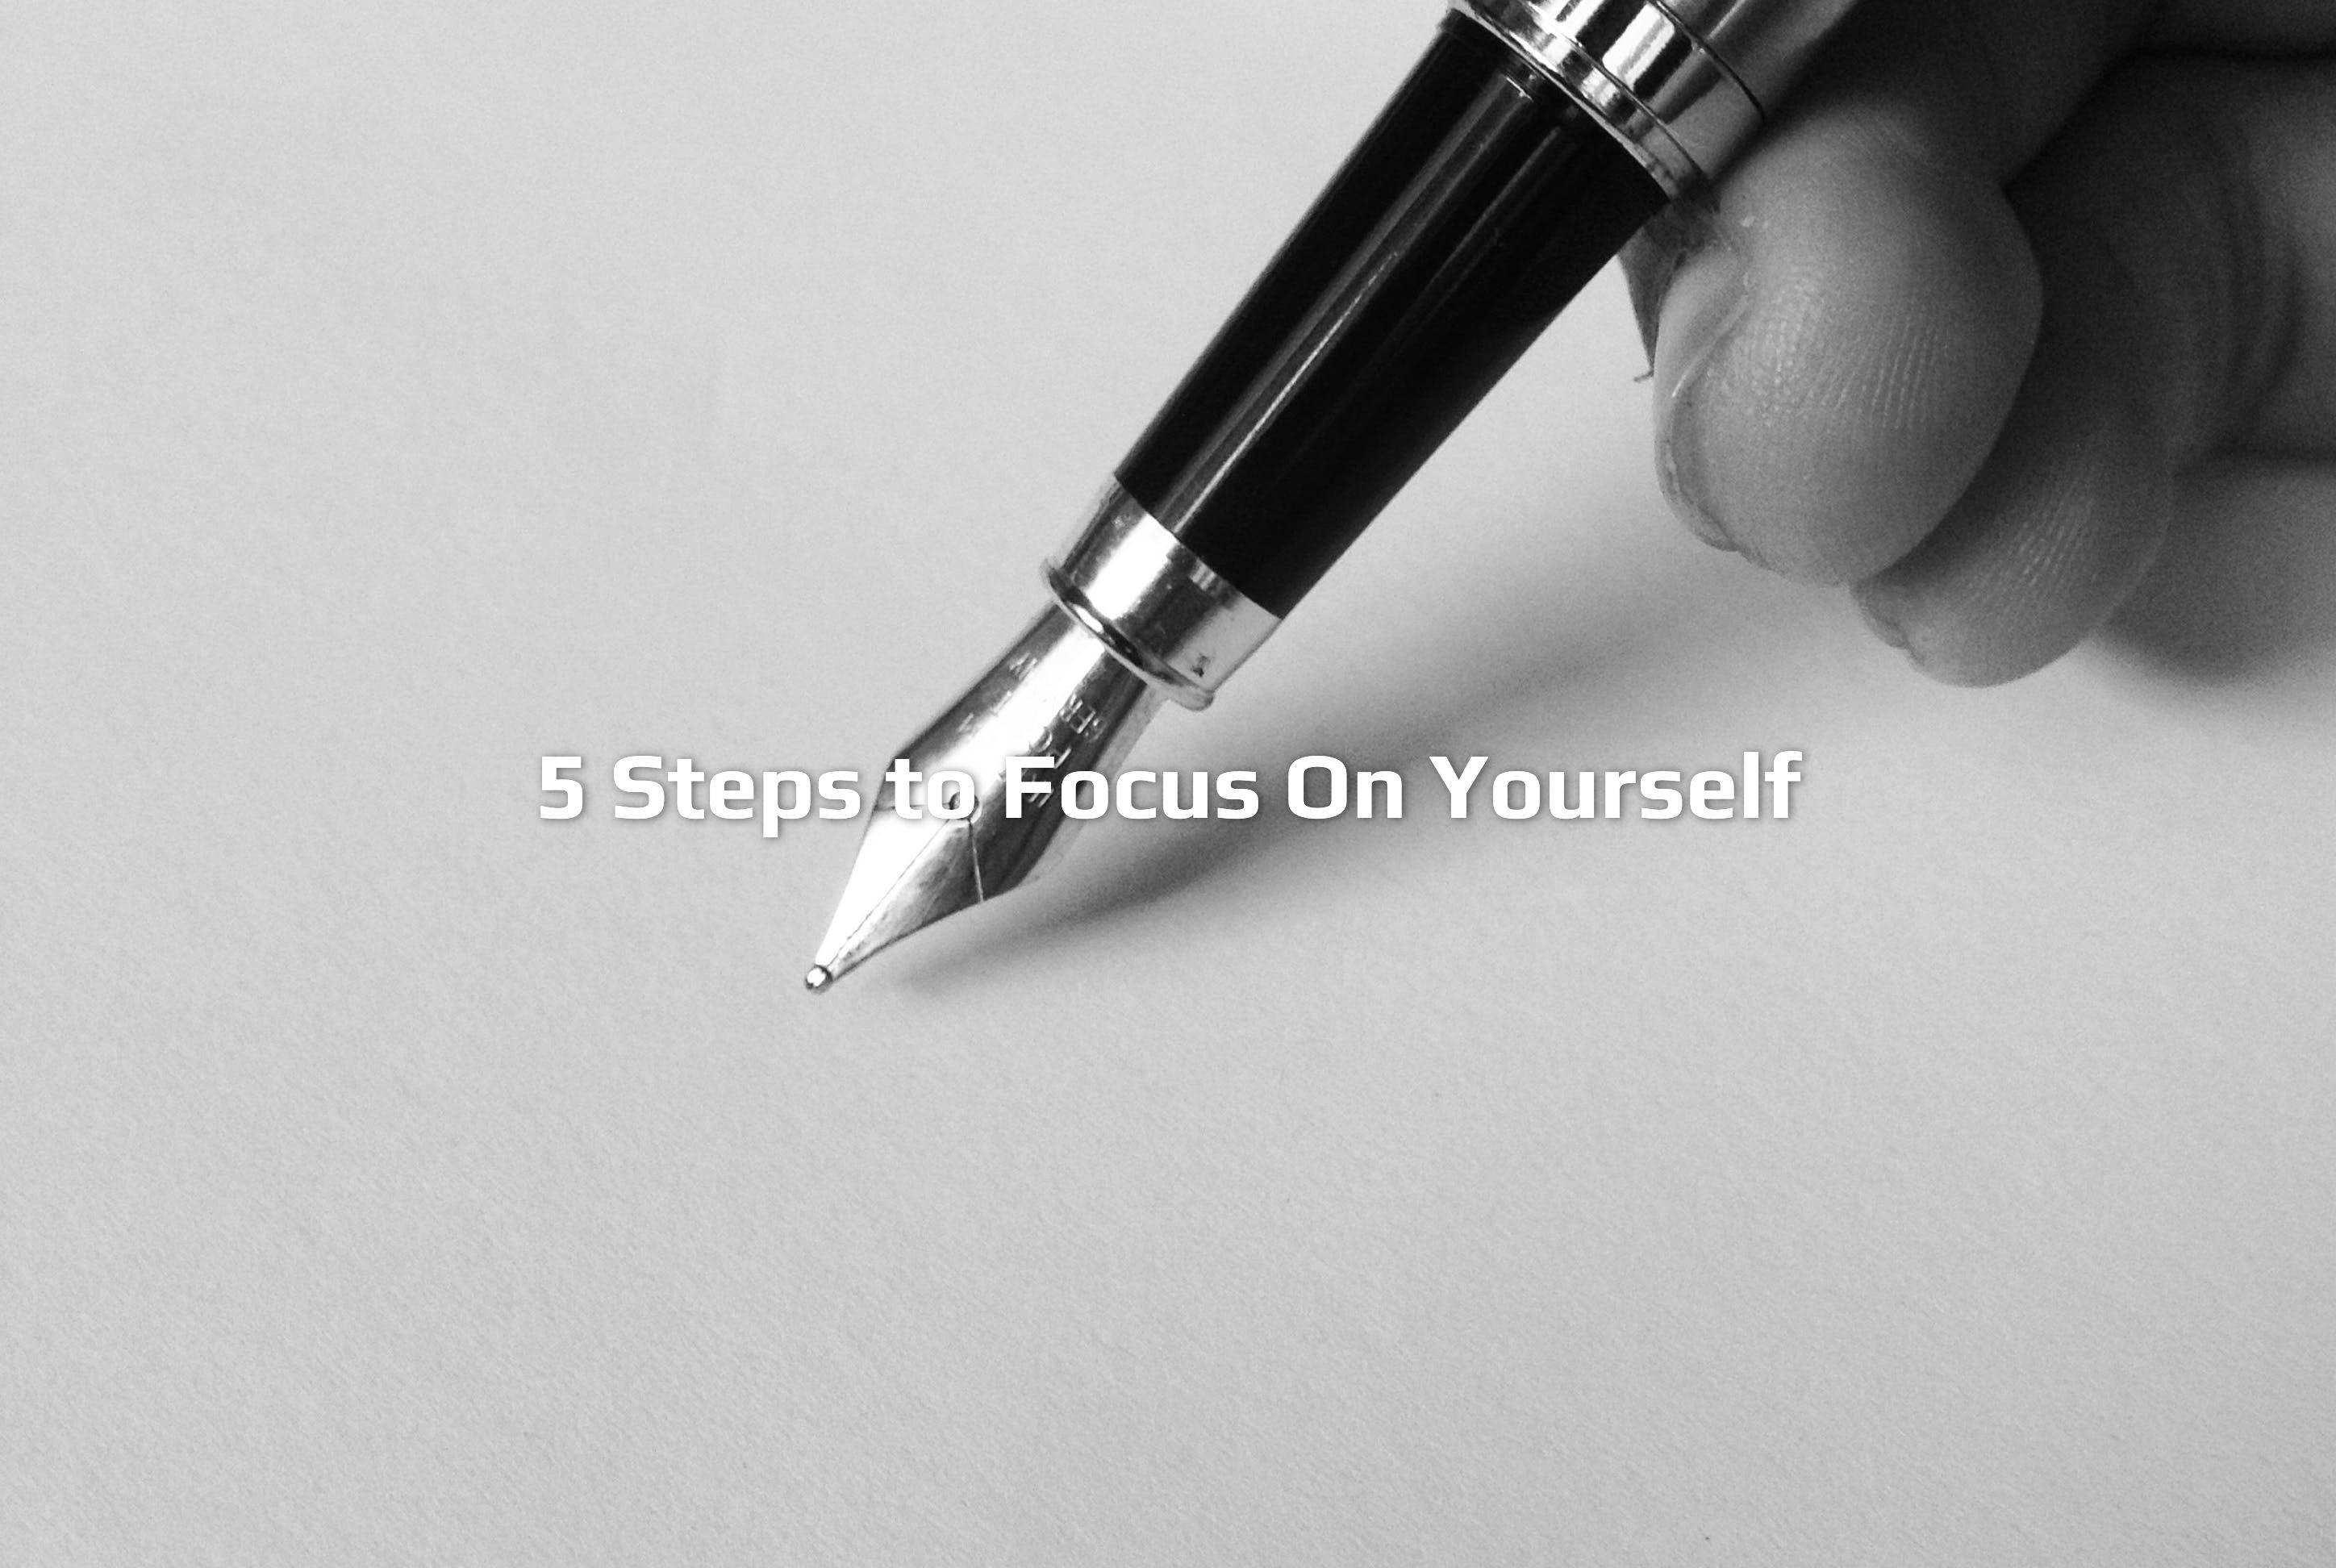 5 simple steps to focus on yourself